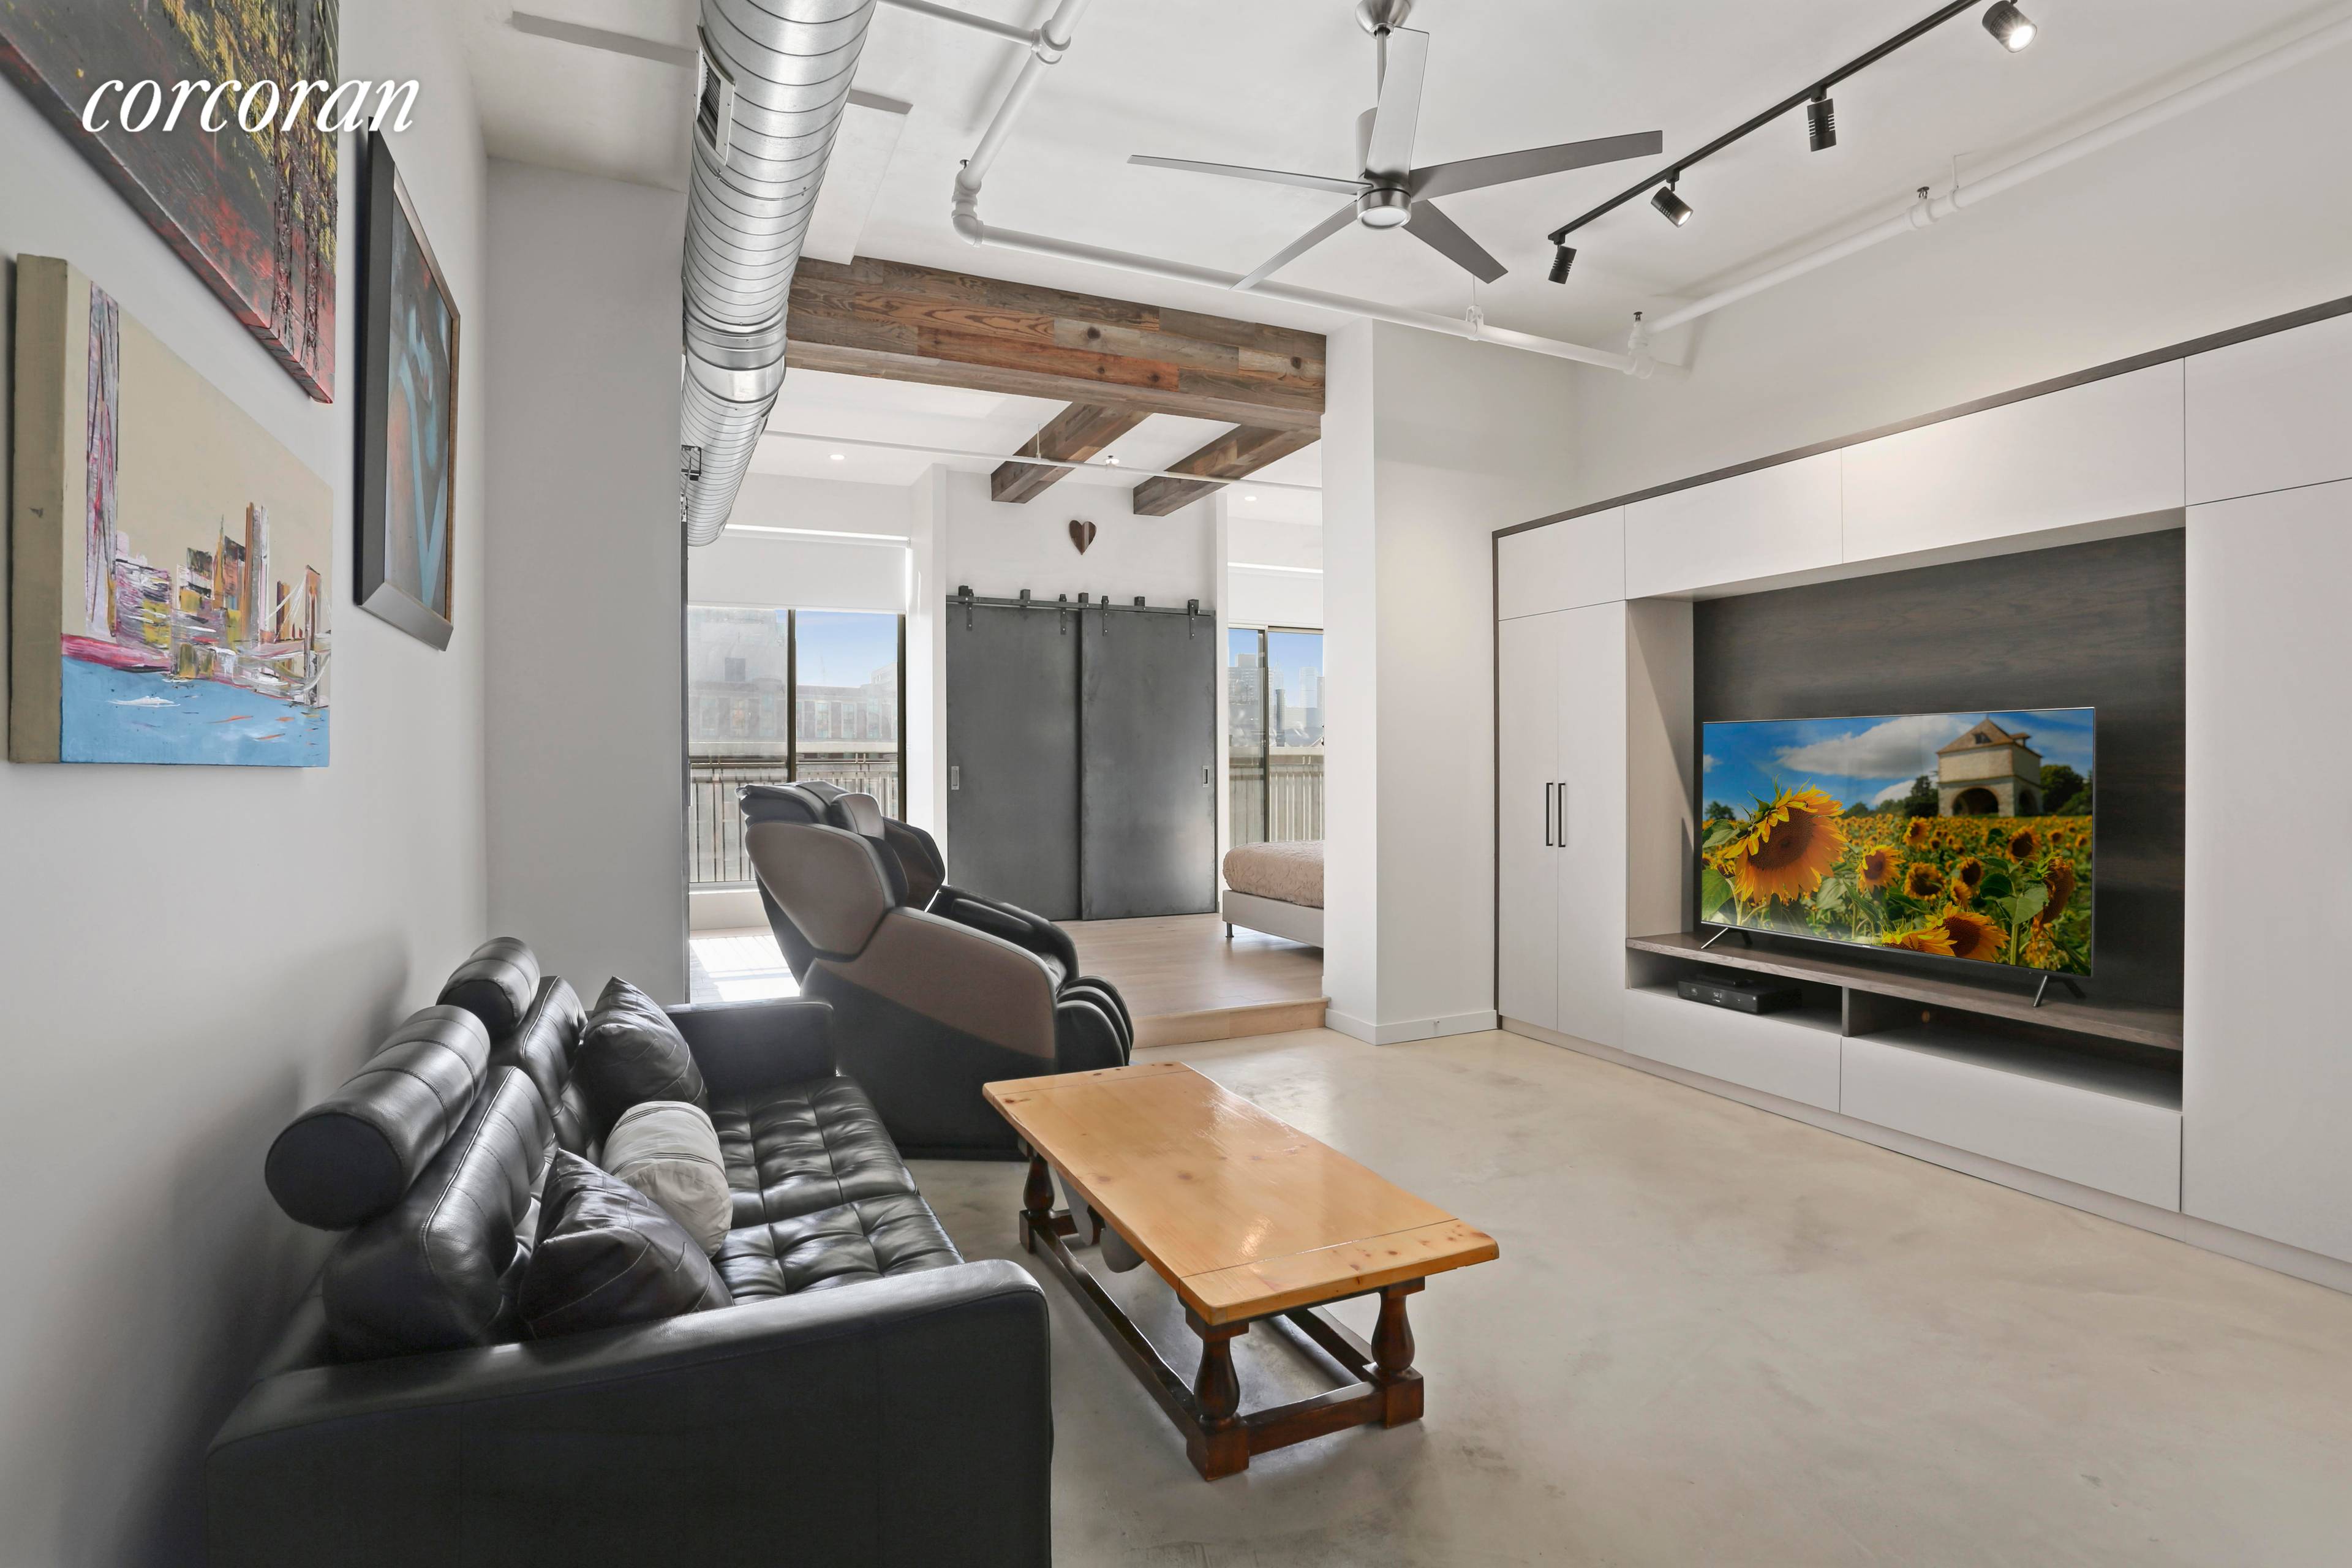 Brand new FULLY GUT RENOVATED custom designed top floor LOFT located in the heart of booming Downtown Brooklyn at THE TOY FACTORY LOFTS.